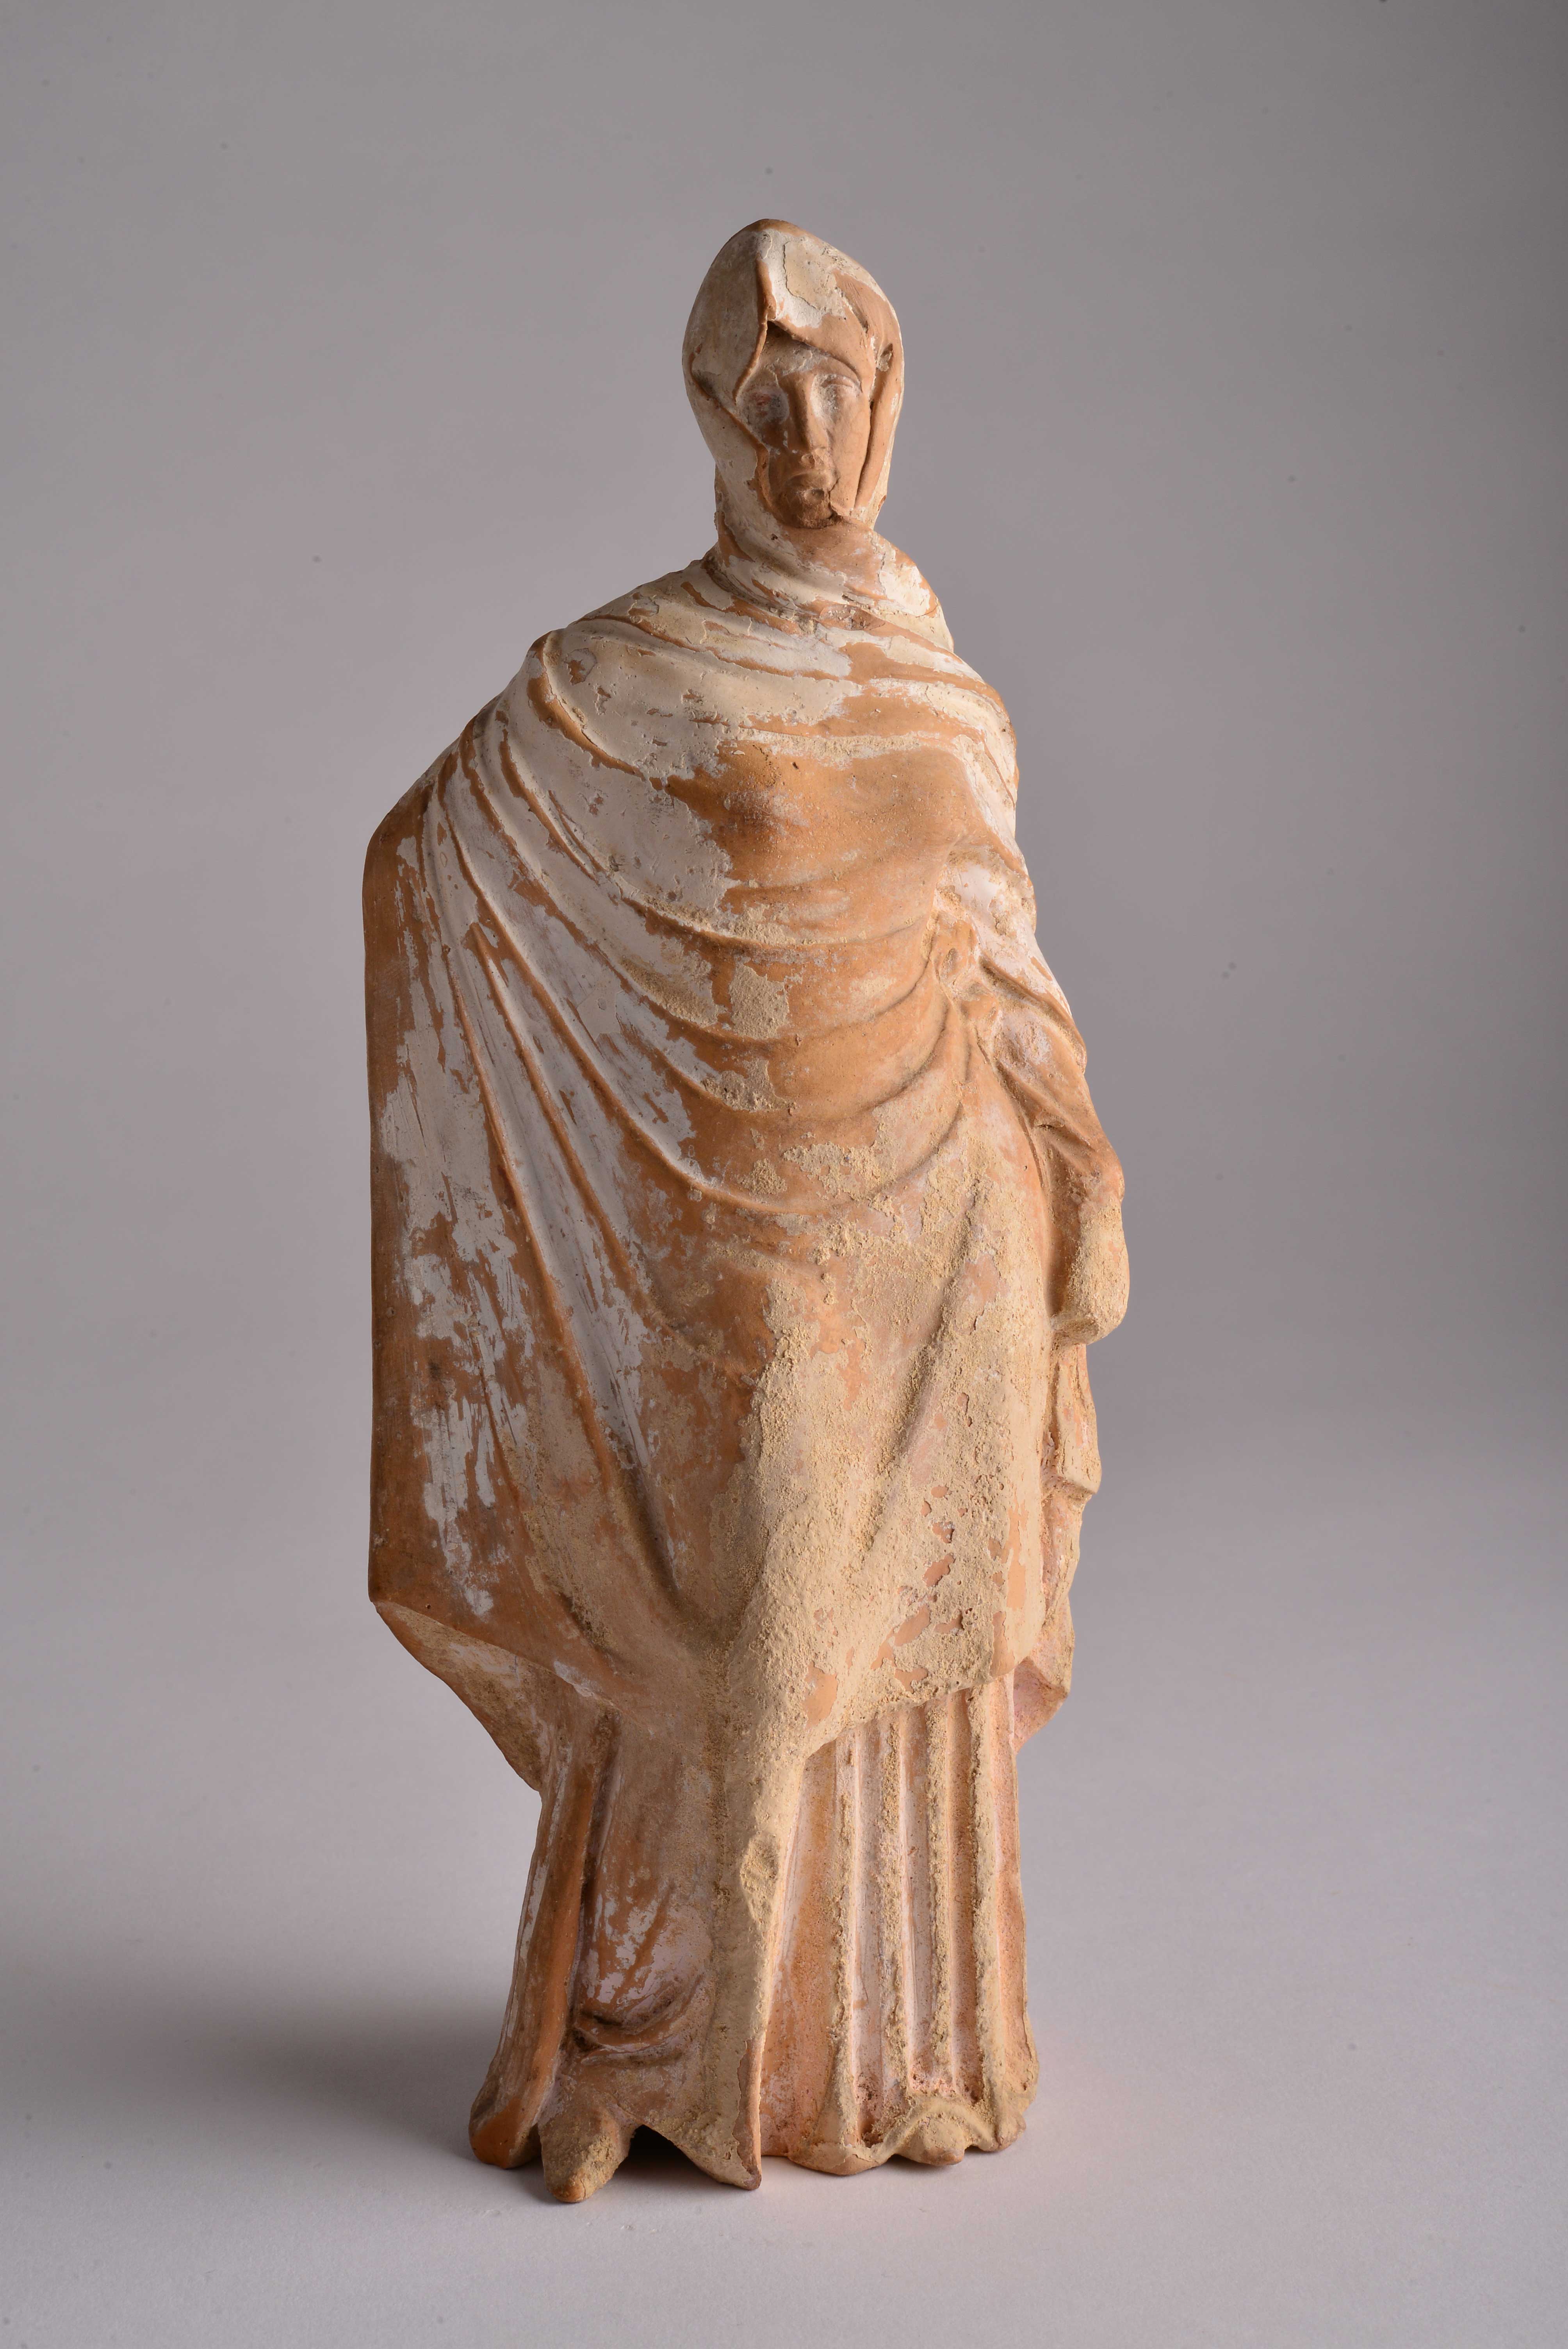 Figurine of veiled woman from the Shefton Collection